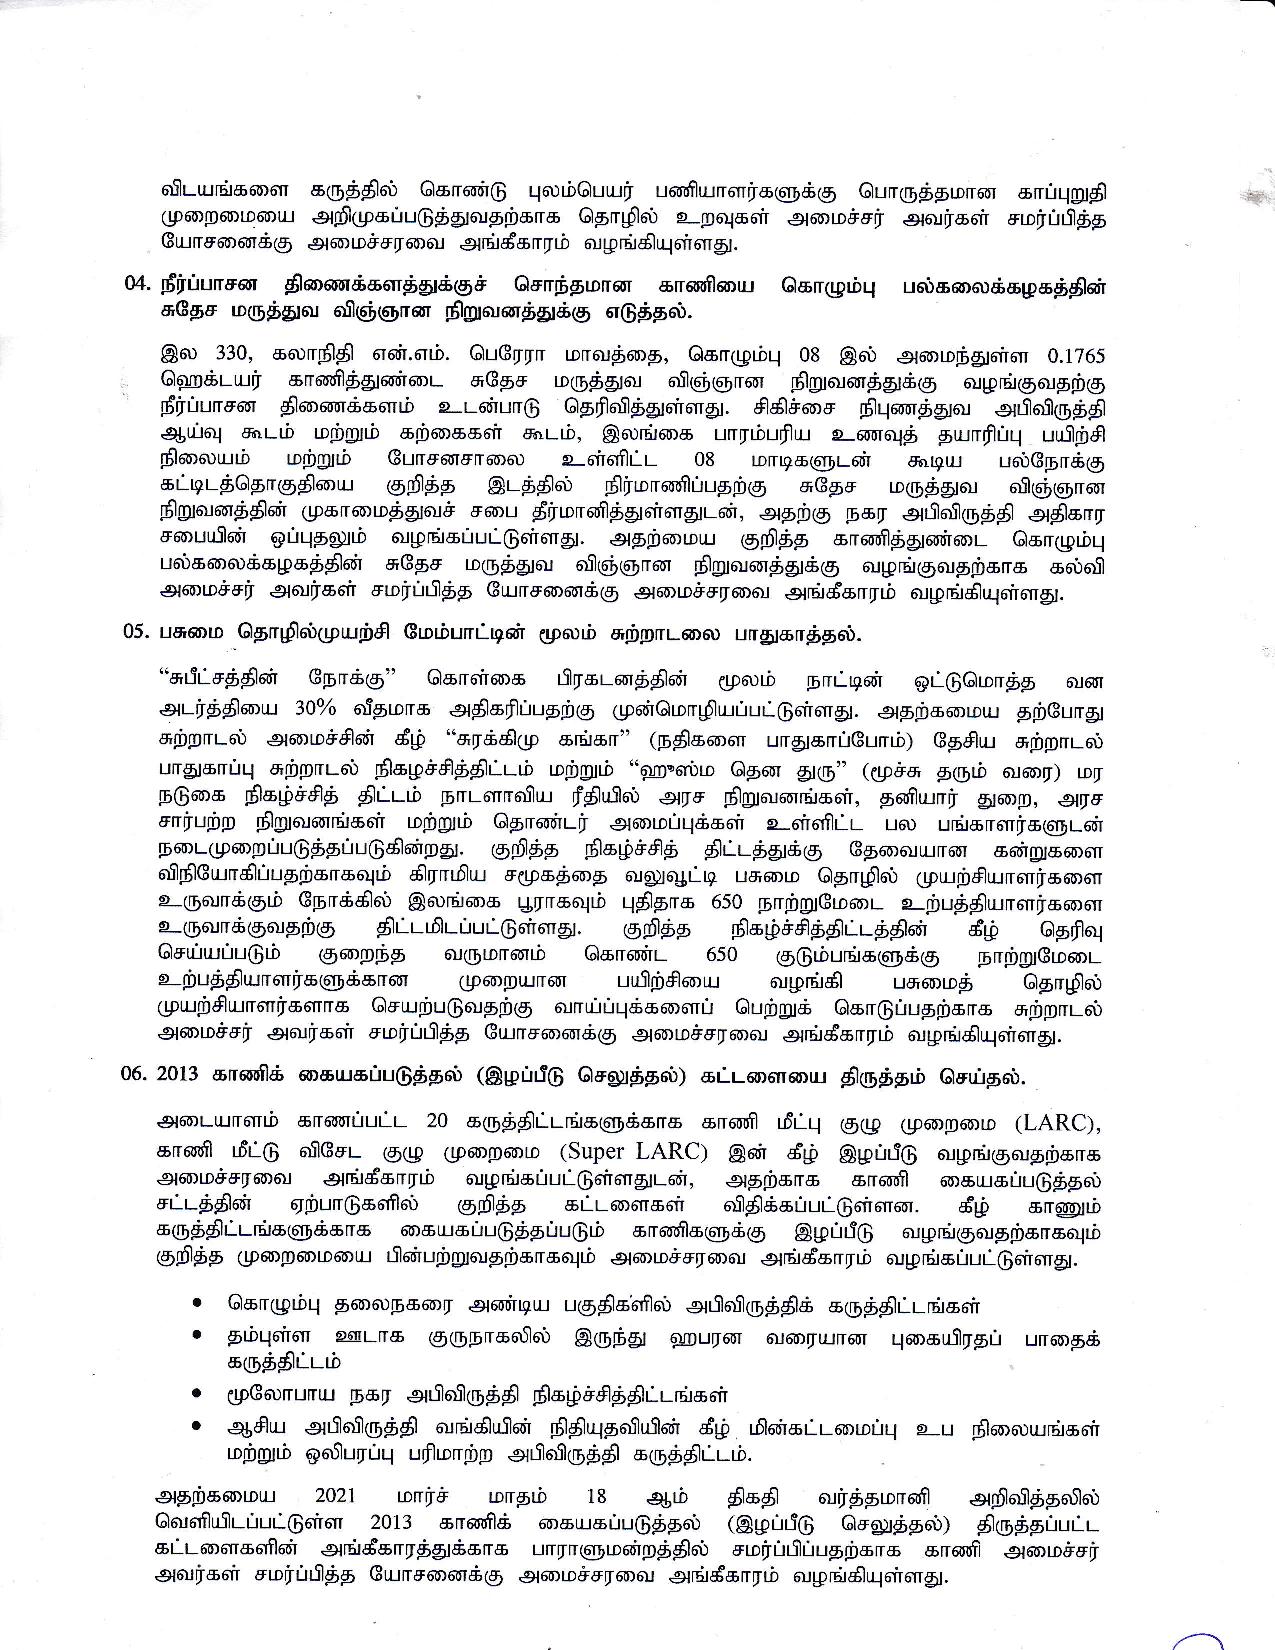 Cabinet Decision on 17.05.201 Tamil page 002